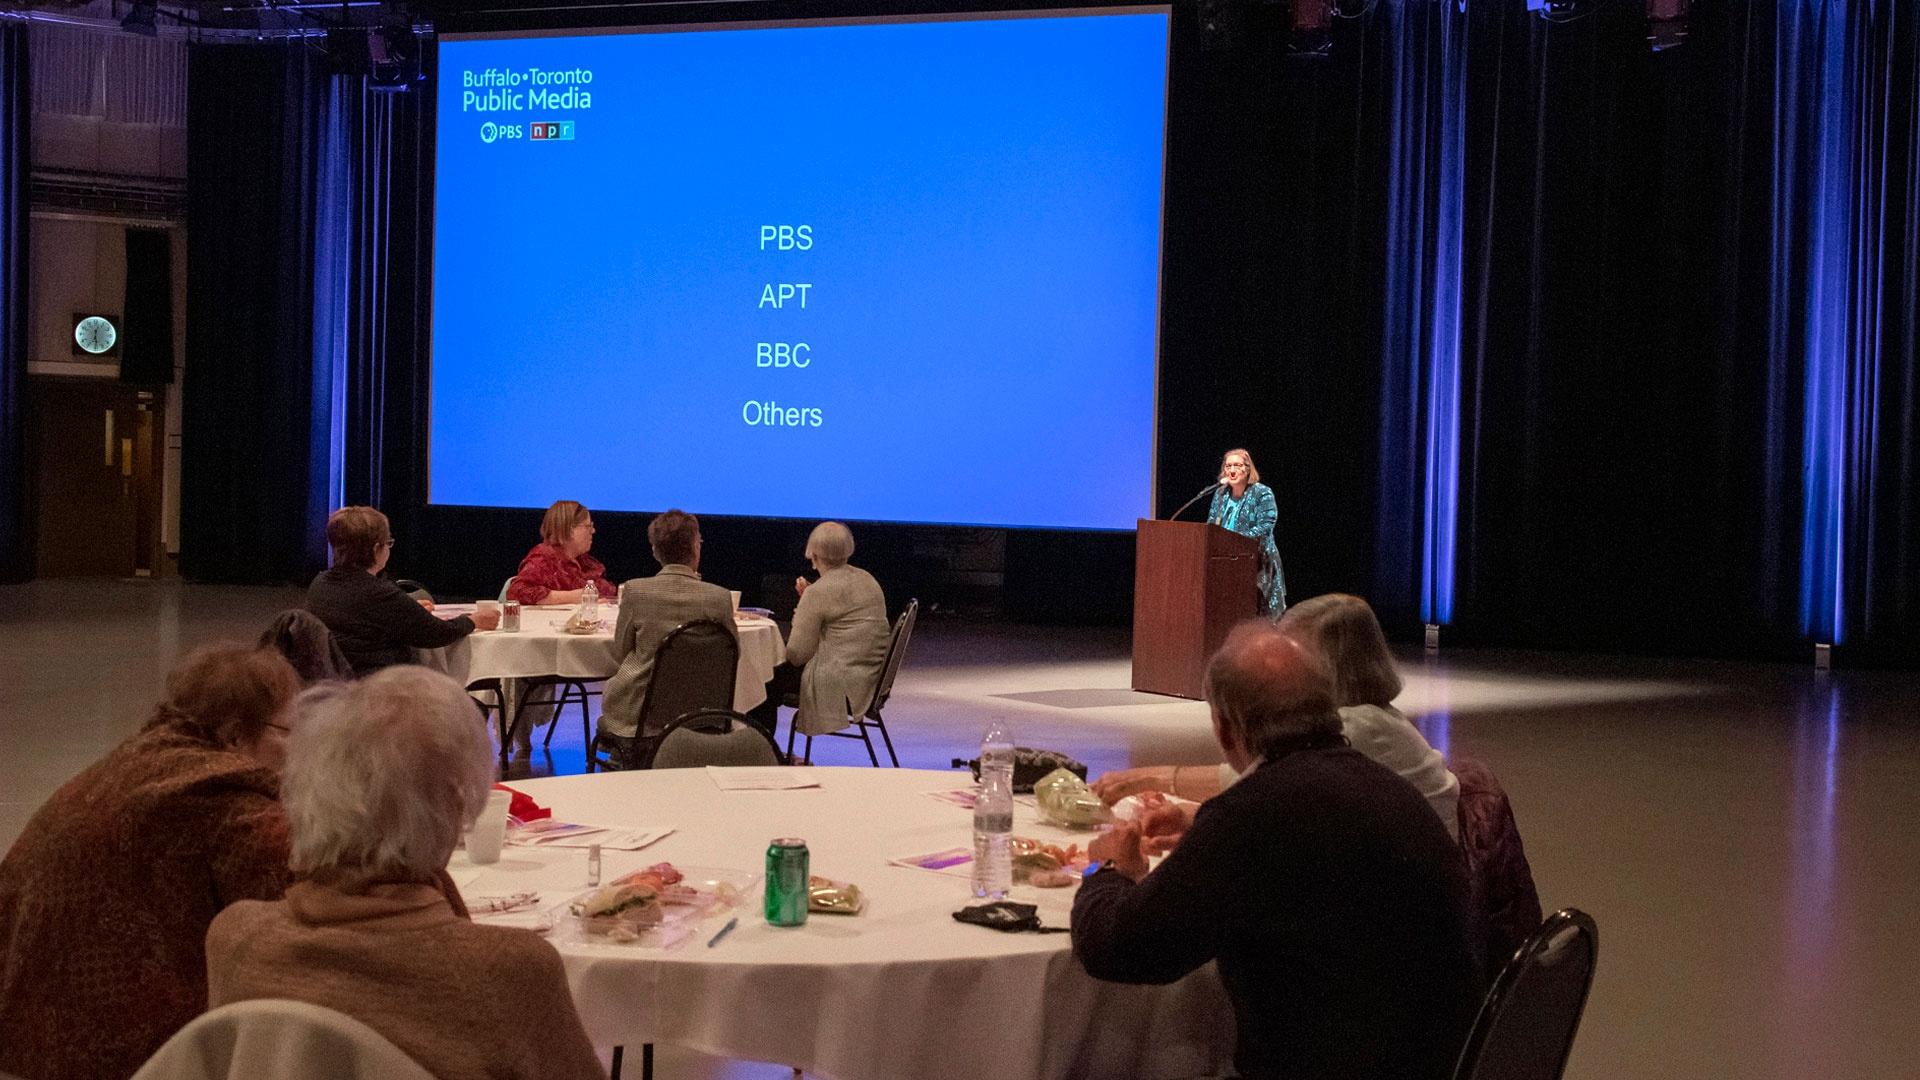 Kathryn Larsen, VP of Broadcast shares what outlets provide programs for WNED PBS at the fall preview leadership event.